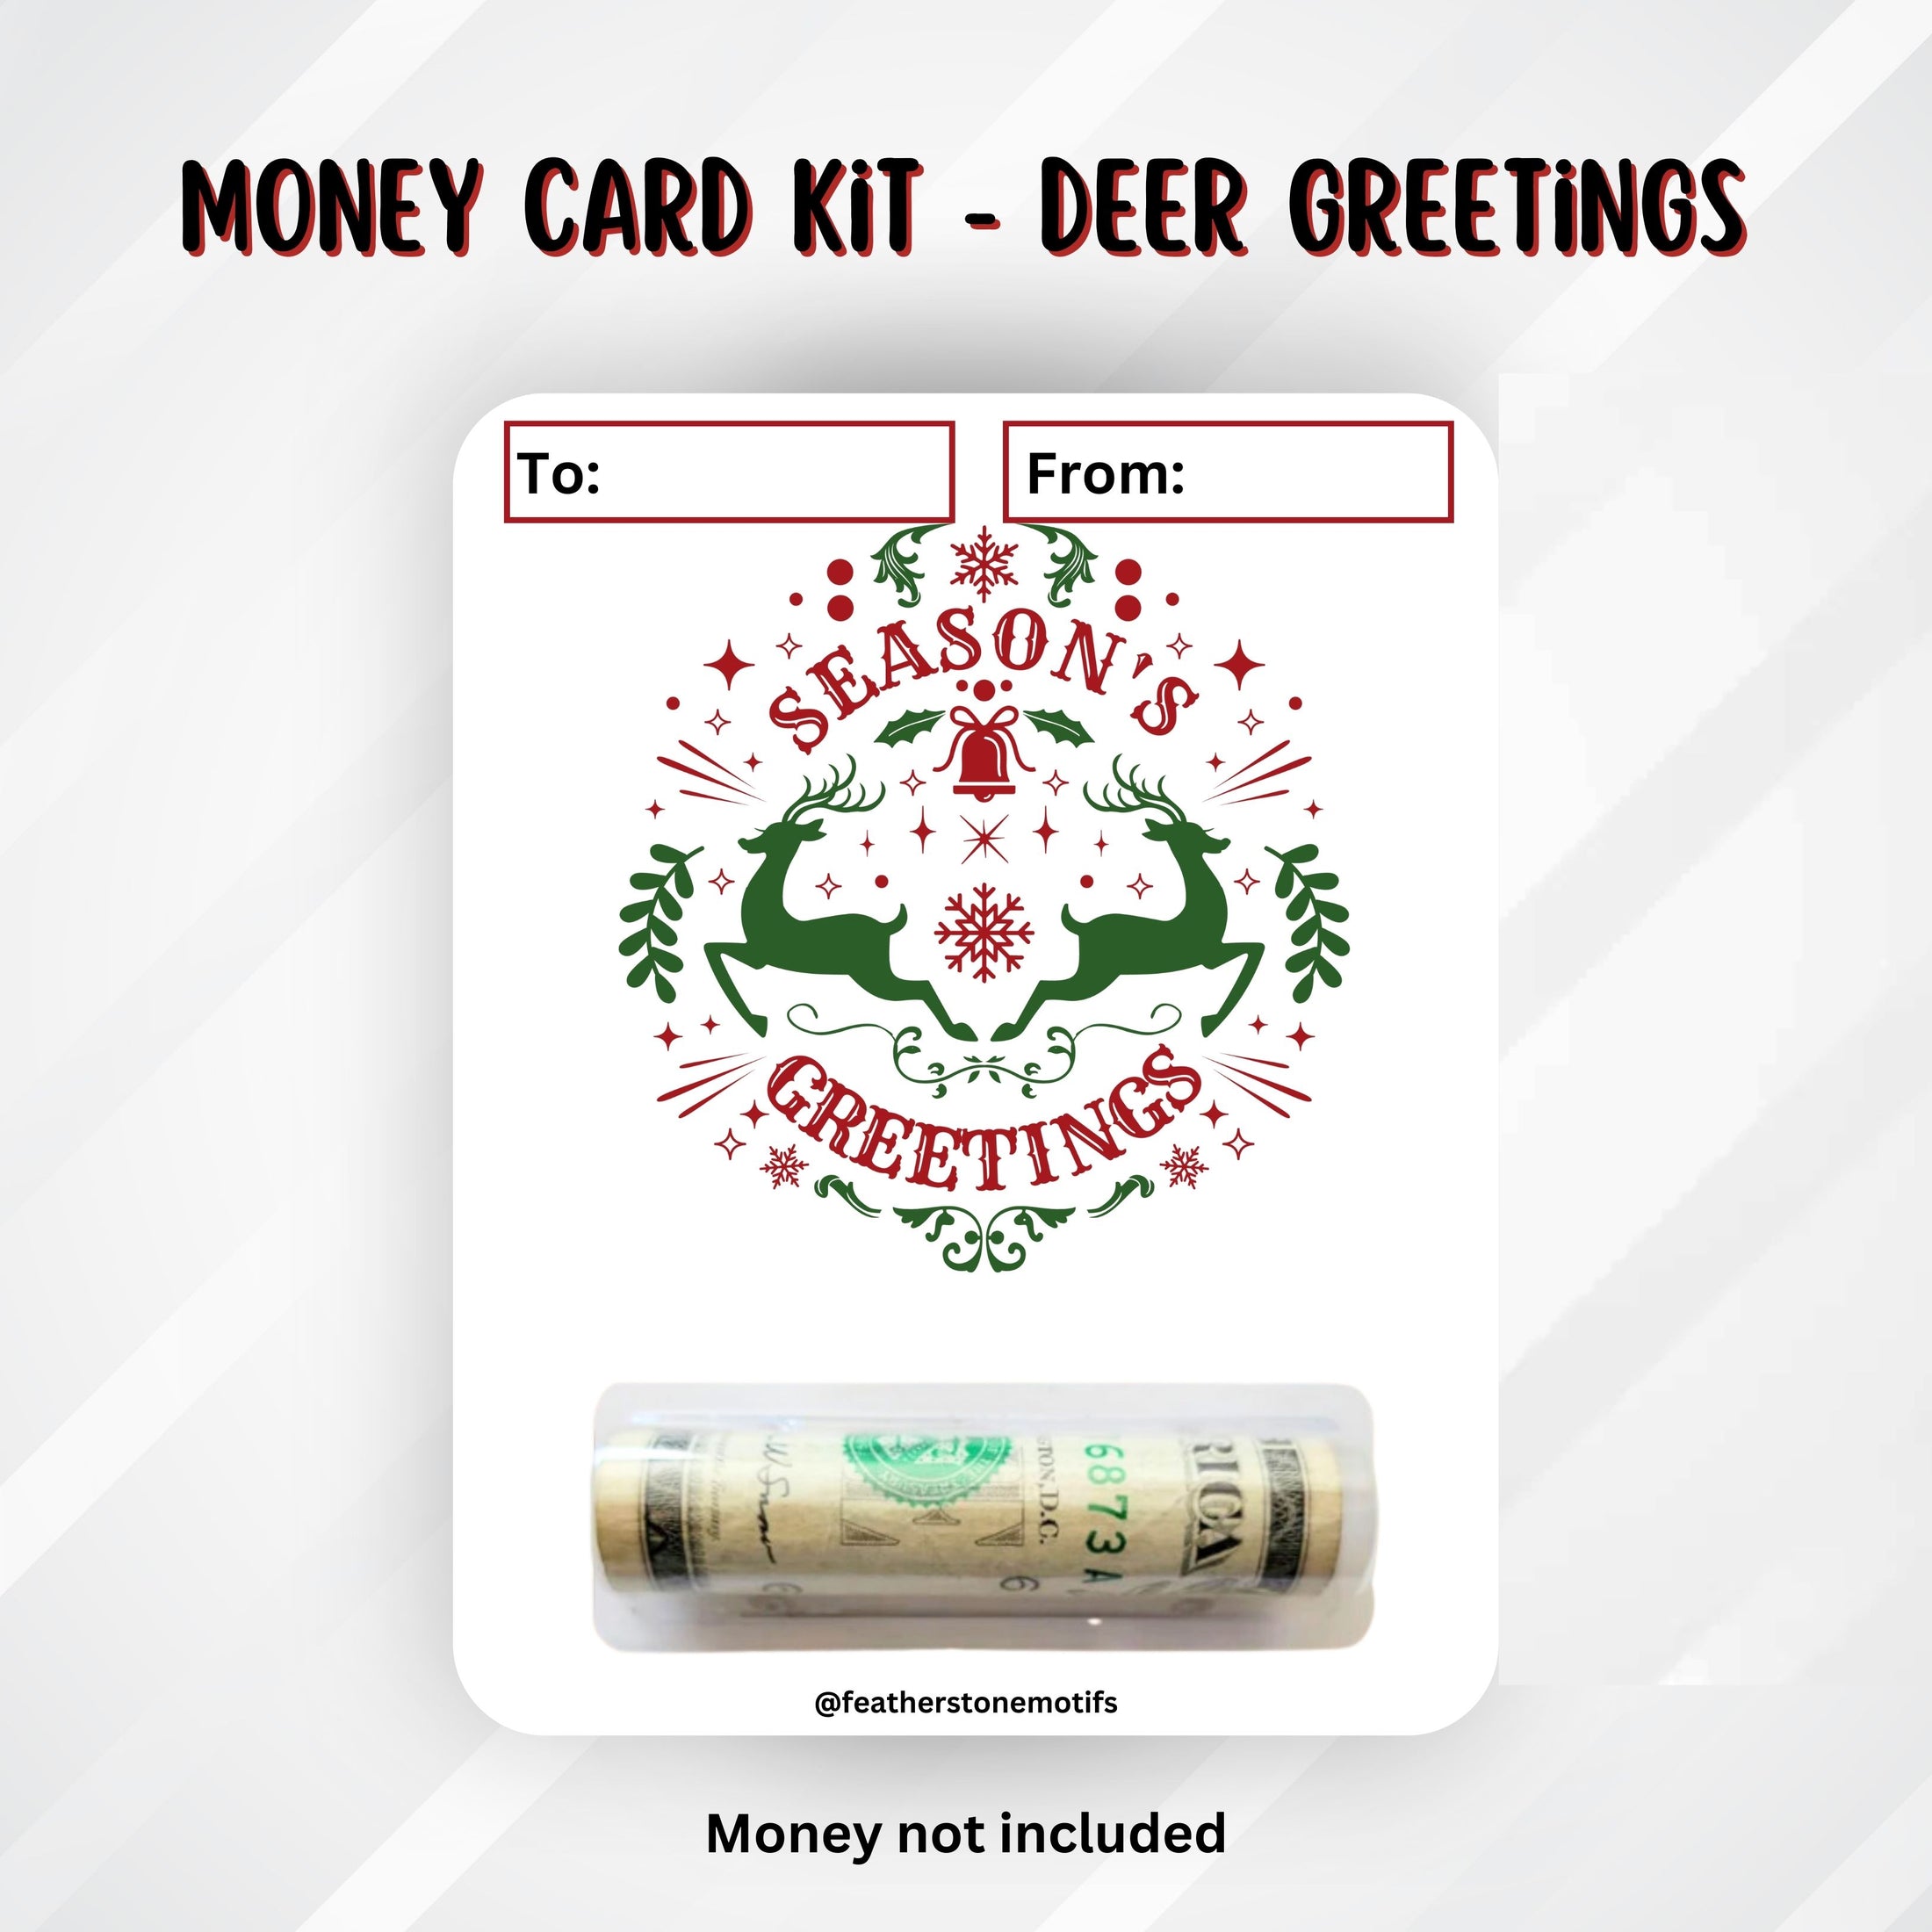 This image show the money tube attached to the Deer Greetings money card.